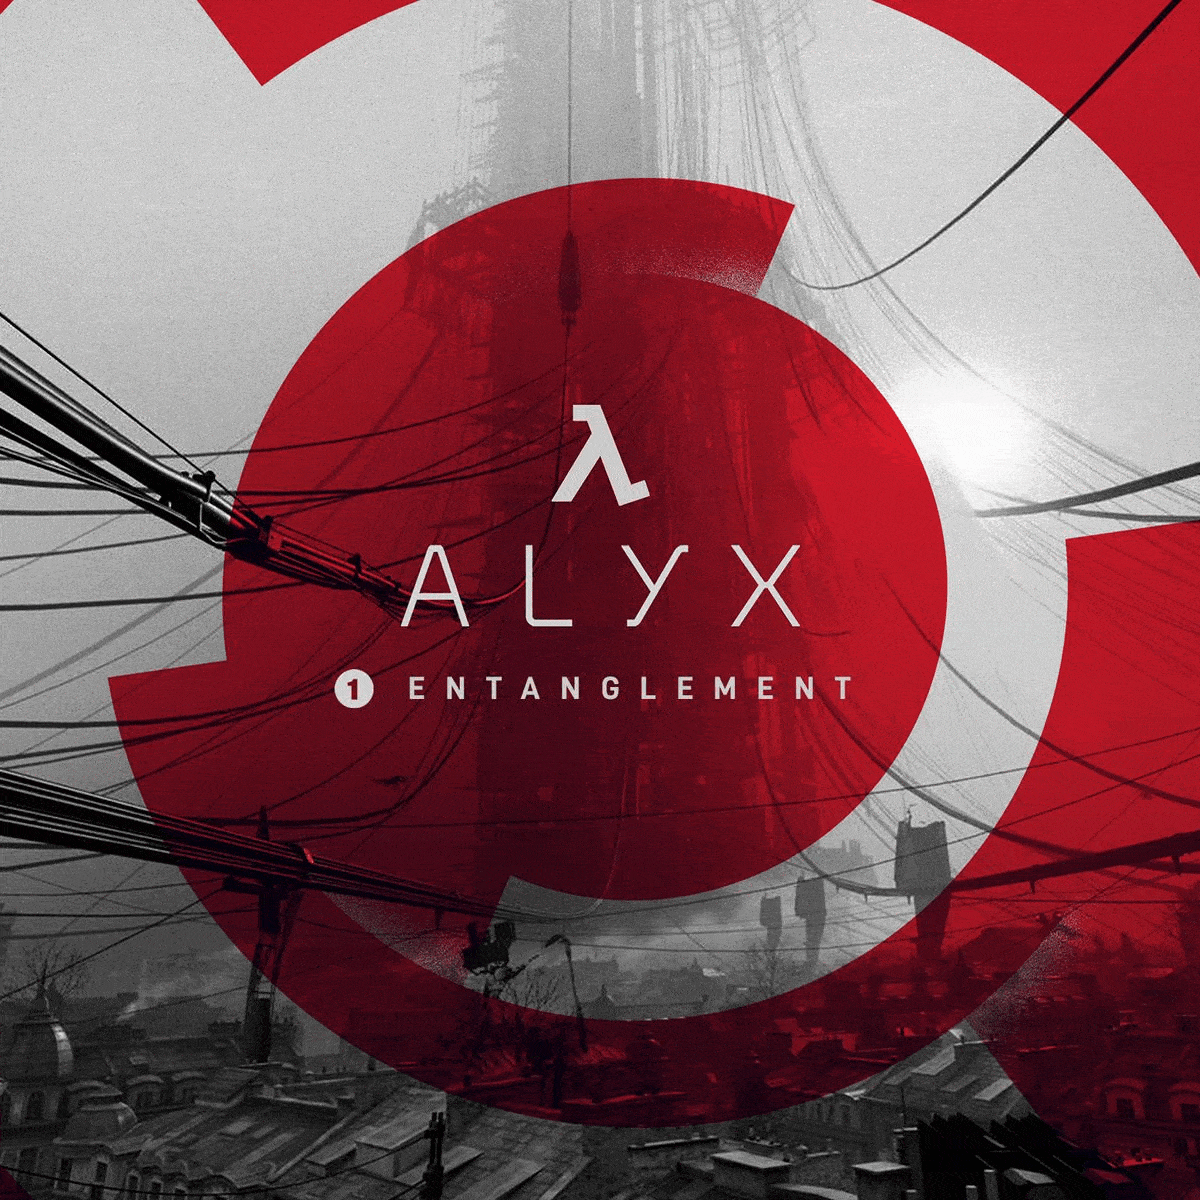 Of all Half-Life: Alyx Soundtracks which volume is your favorite?